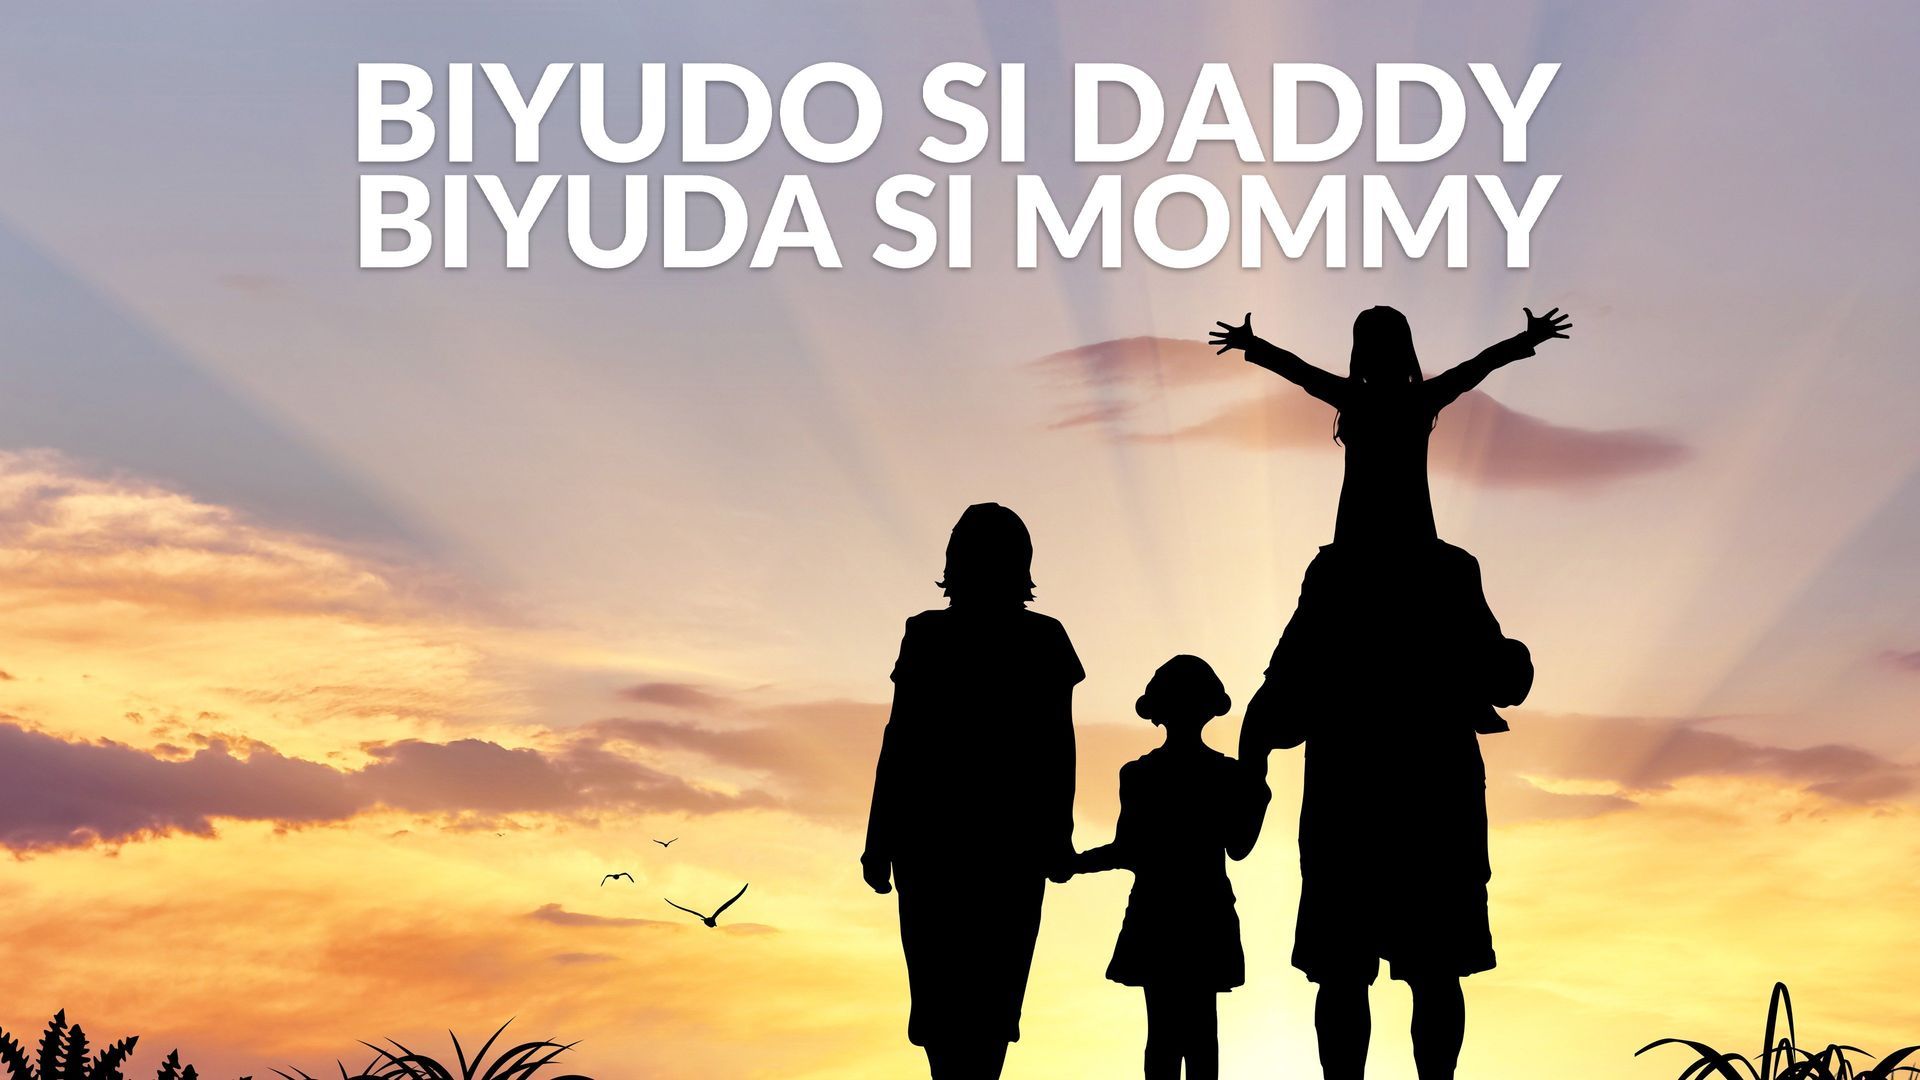 ABS-CBN Film Productions Inc. (Star Cinema) - Being in a blended family  doesn't come easily! Watch 'Biyudo si Daddy, Biyuda si Mommy' FREE FULL  MOVIE here:  To watch more full movies